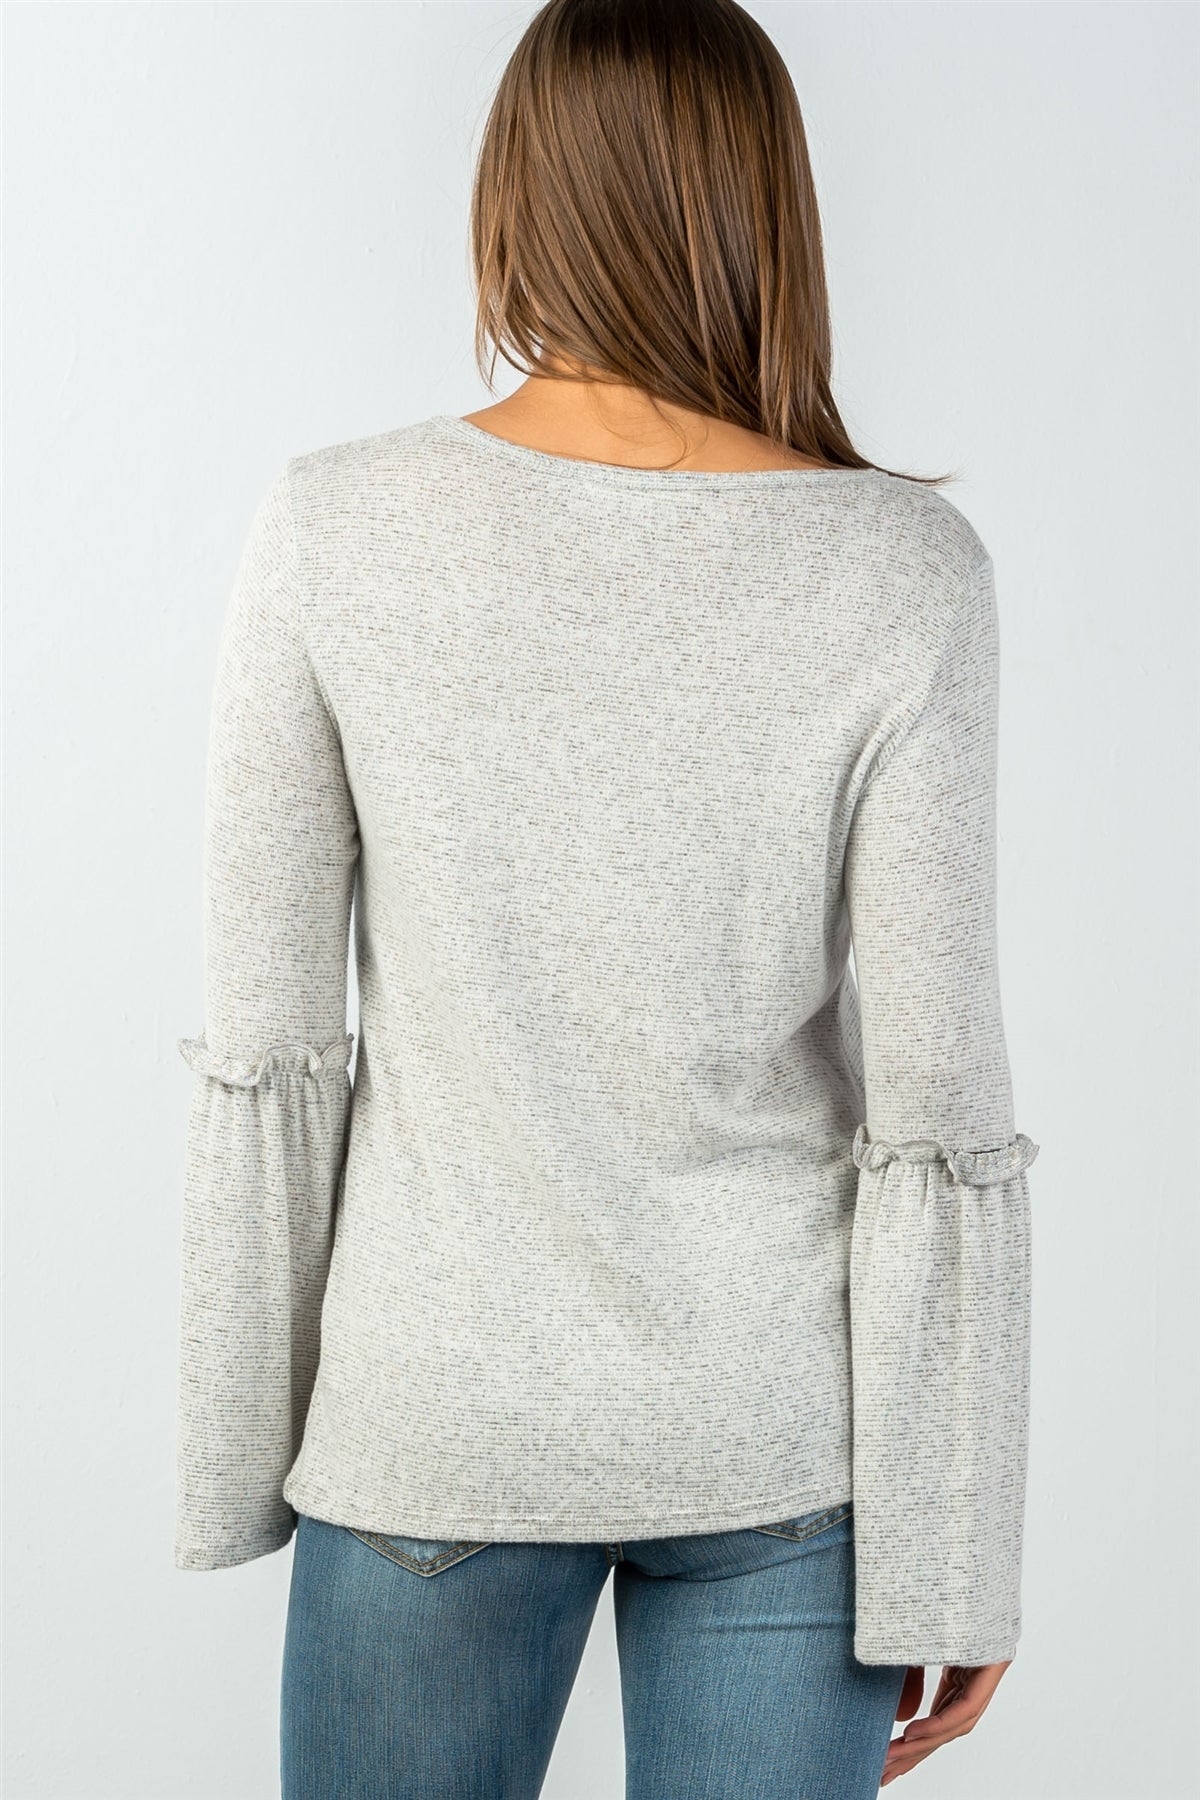 Ladies fashion grey comfy ruffle detail at elbow long bell sleeves top